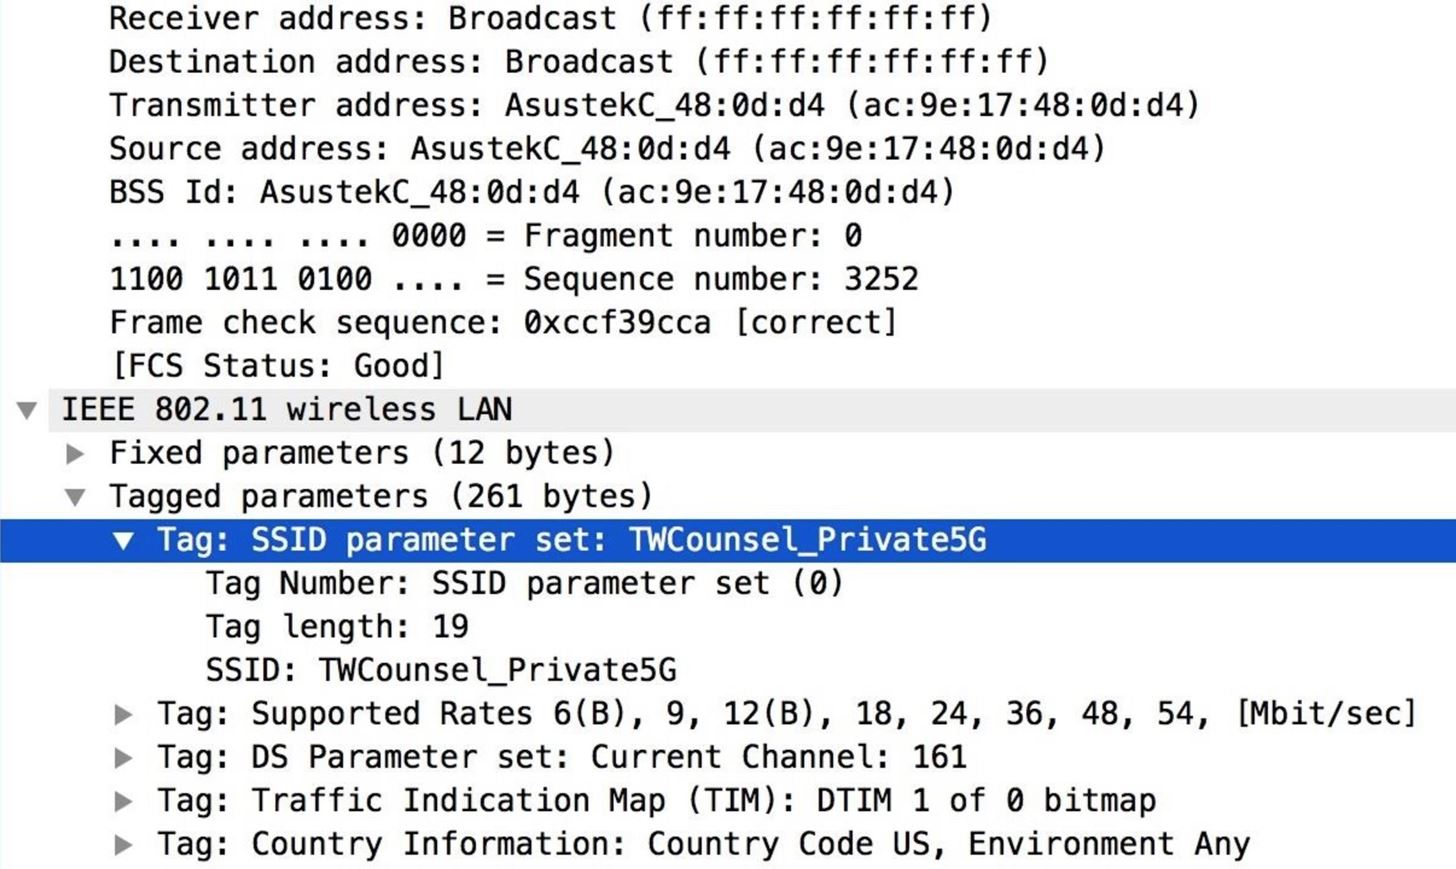 How to Track Wi-Fi Devices & Connect to Them Using Probequest